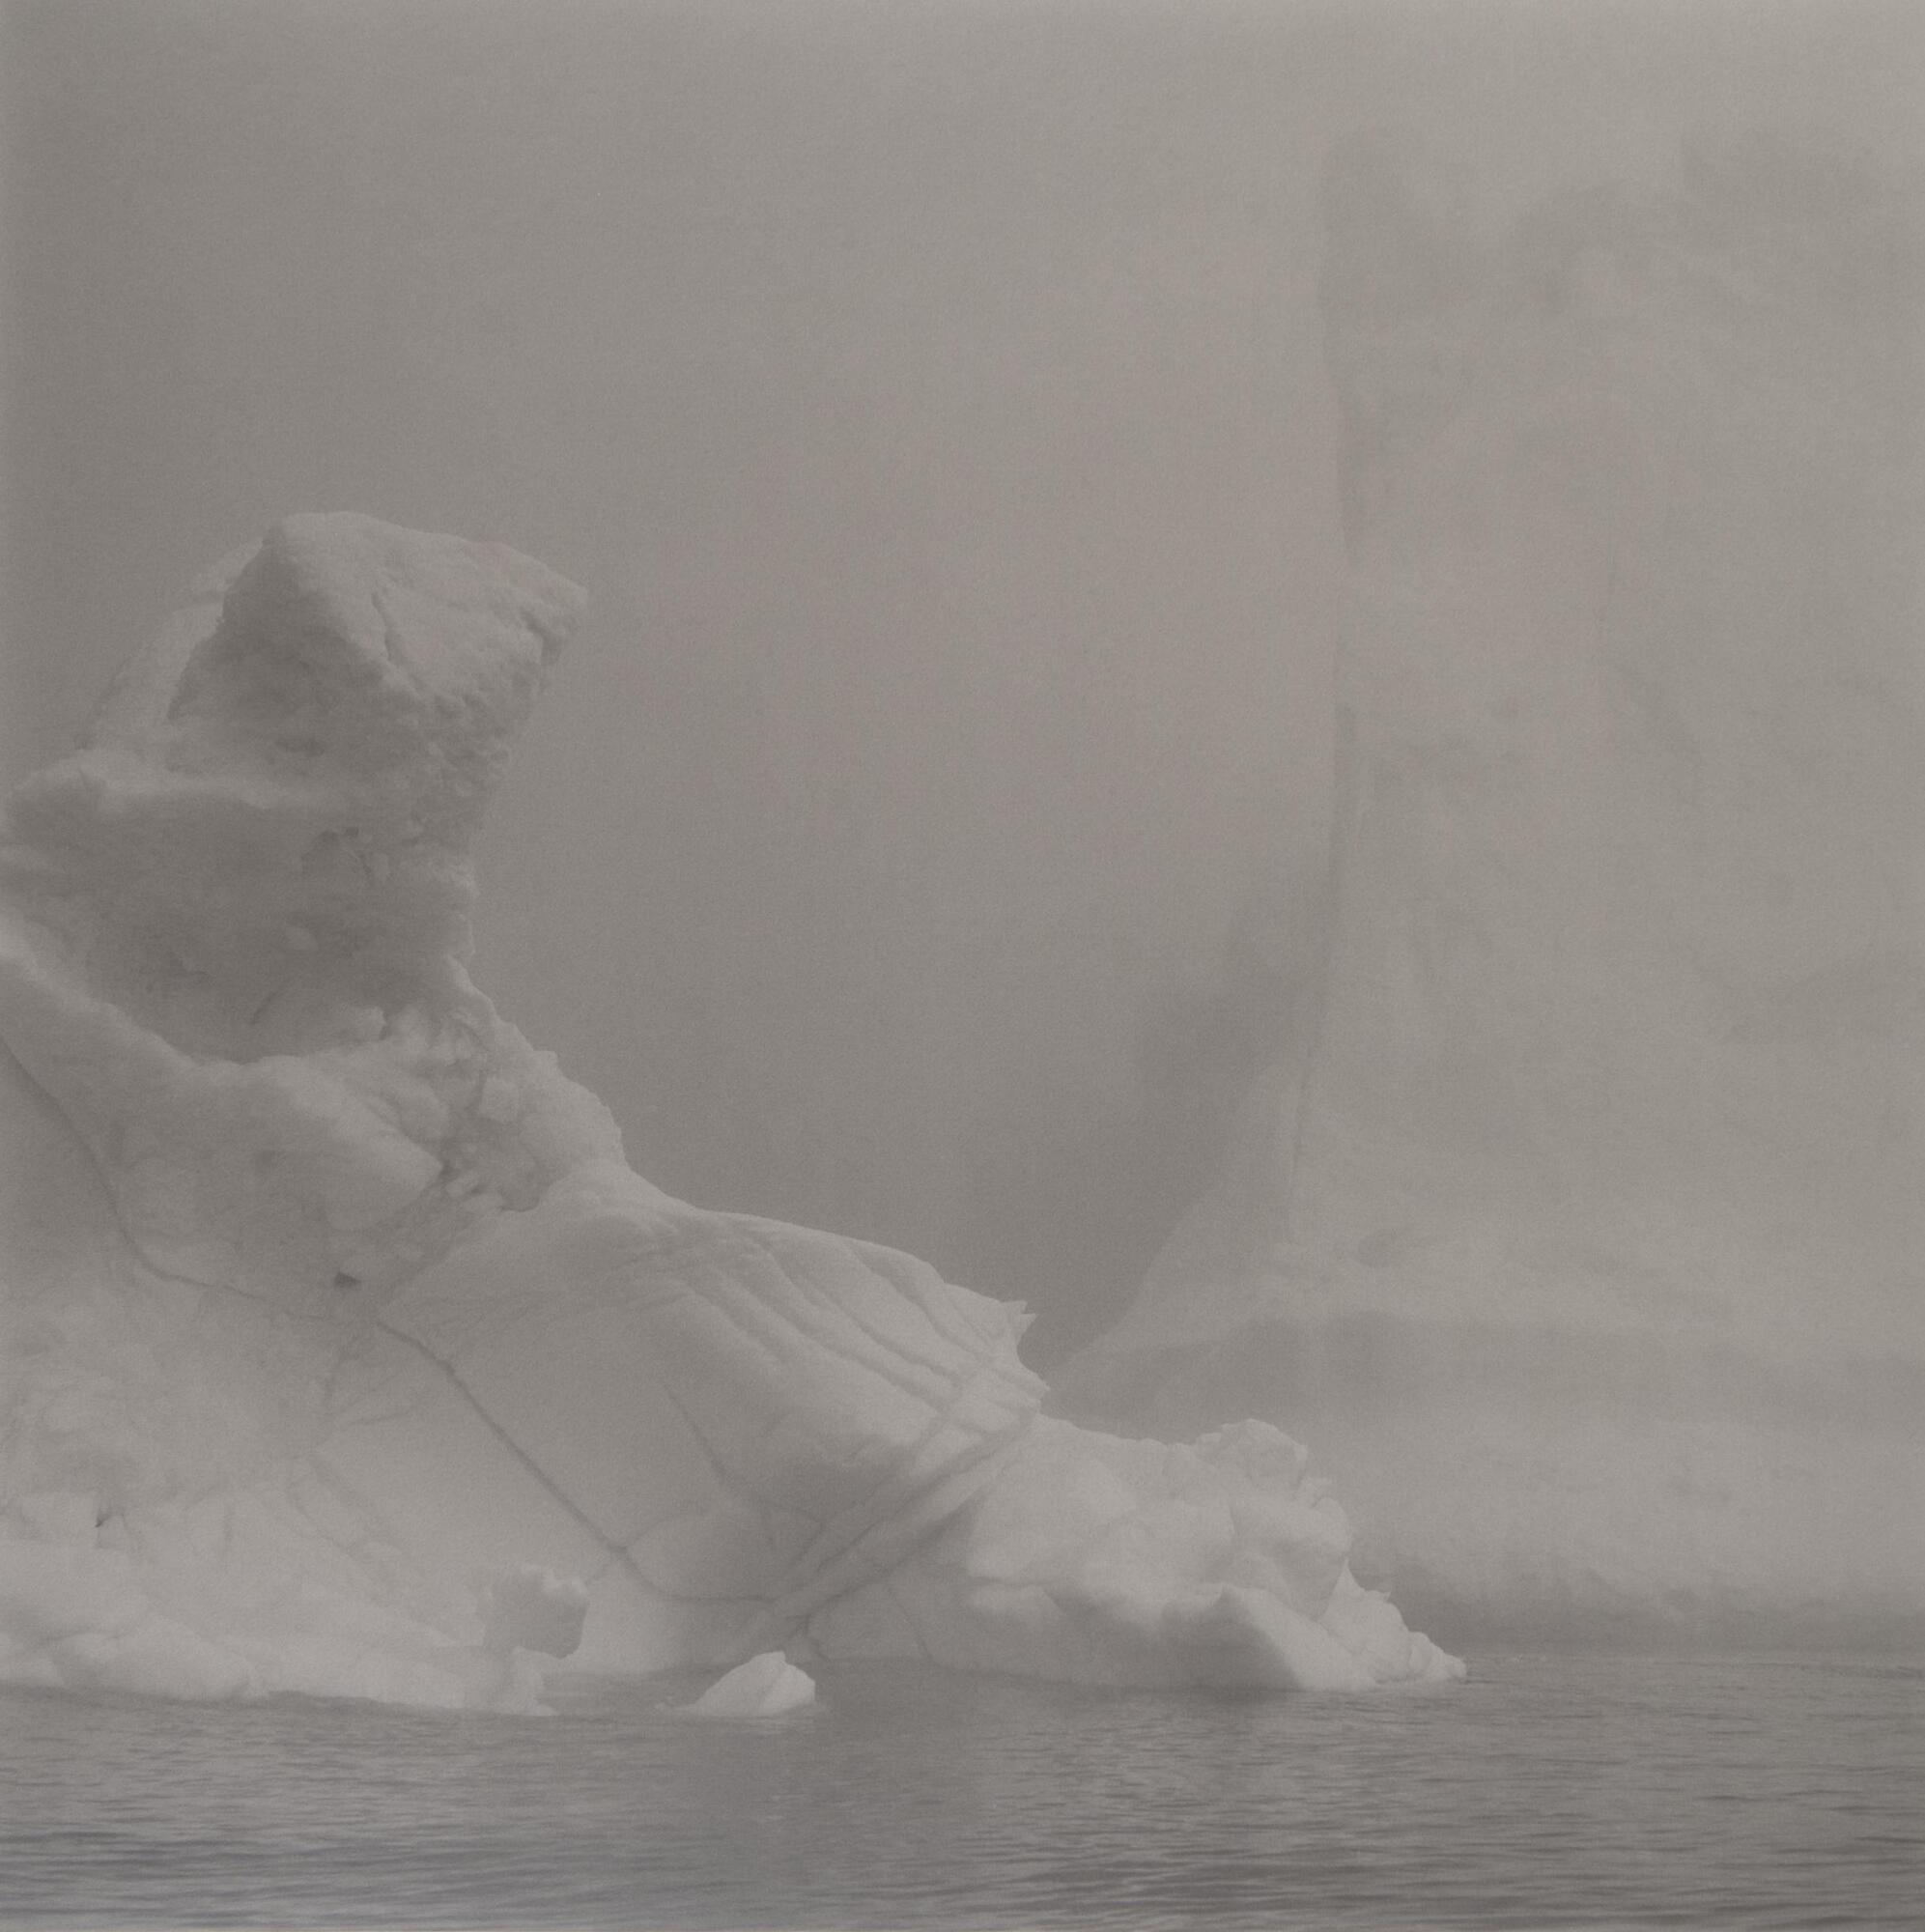 This photograph depicts an iceberg in a bay. The iceberg fills most of the frame and subtely emerges from the background.